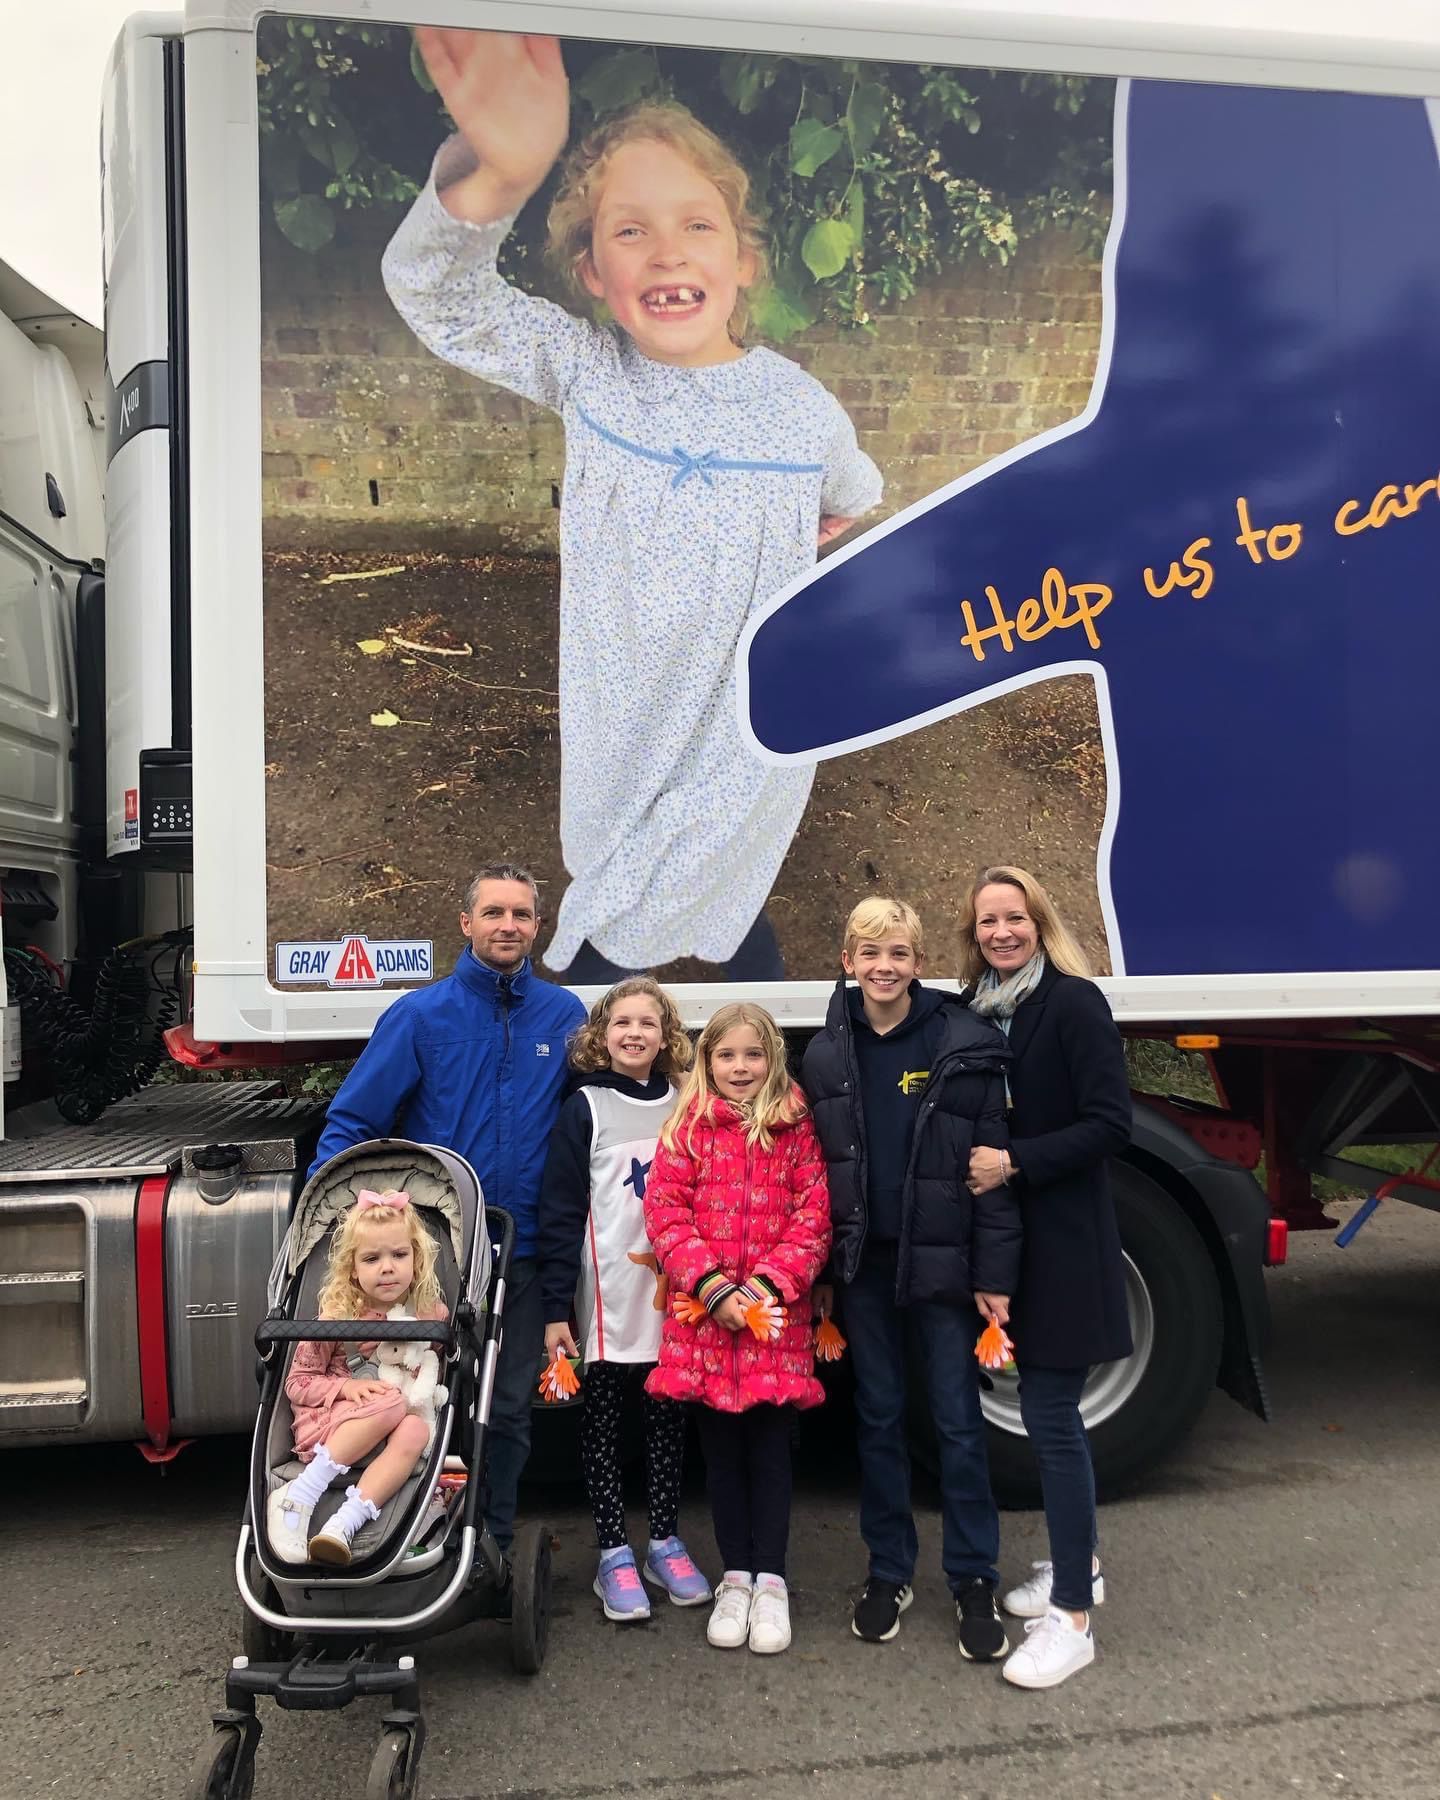 The Clarke family in front of Mimi's lorry